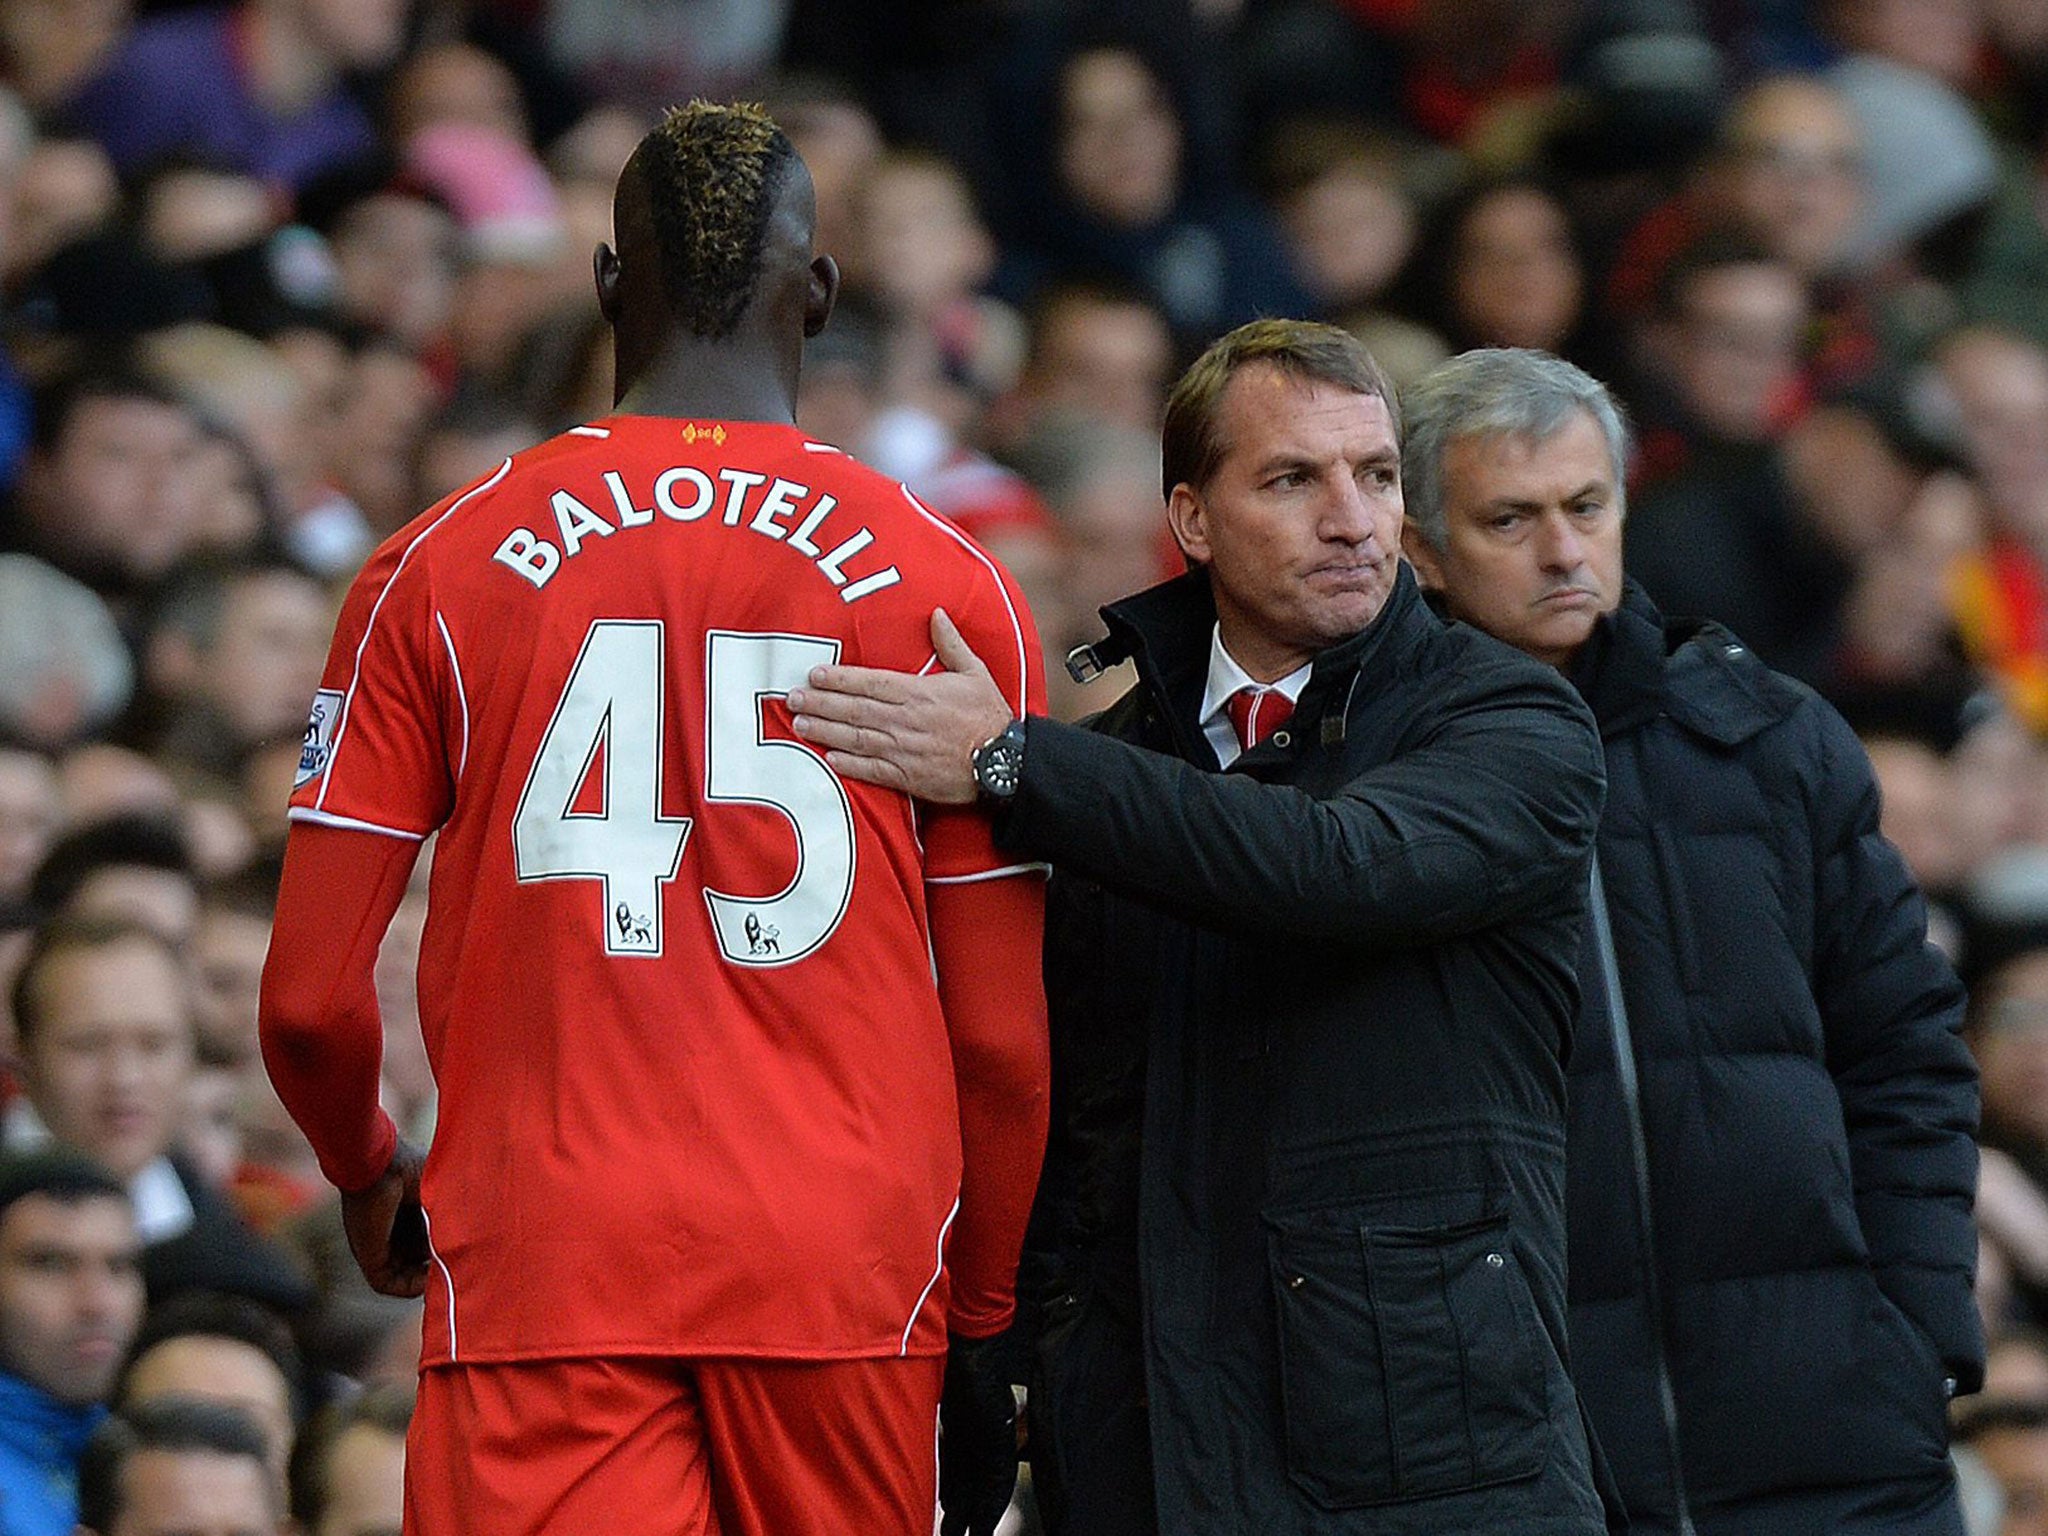 Mario Balotelli (left) is substituted by Brendan Rodgers (right)